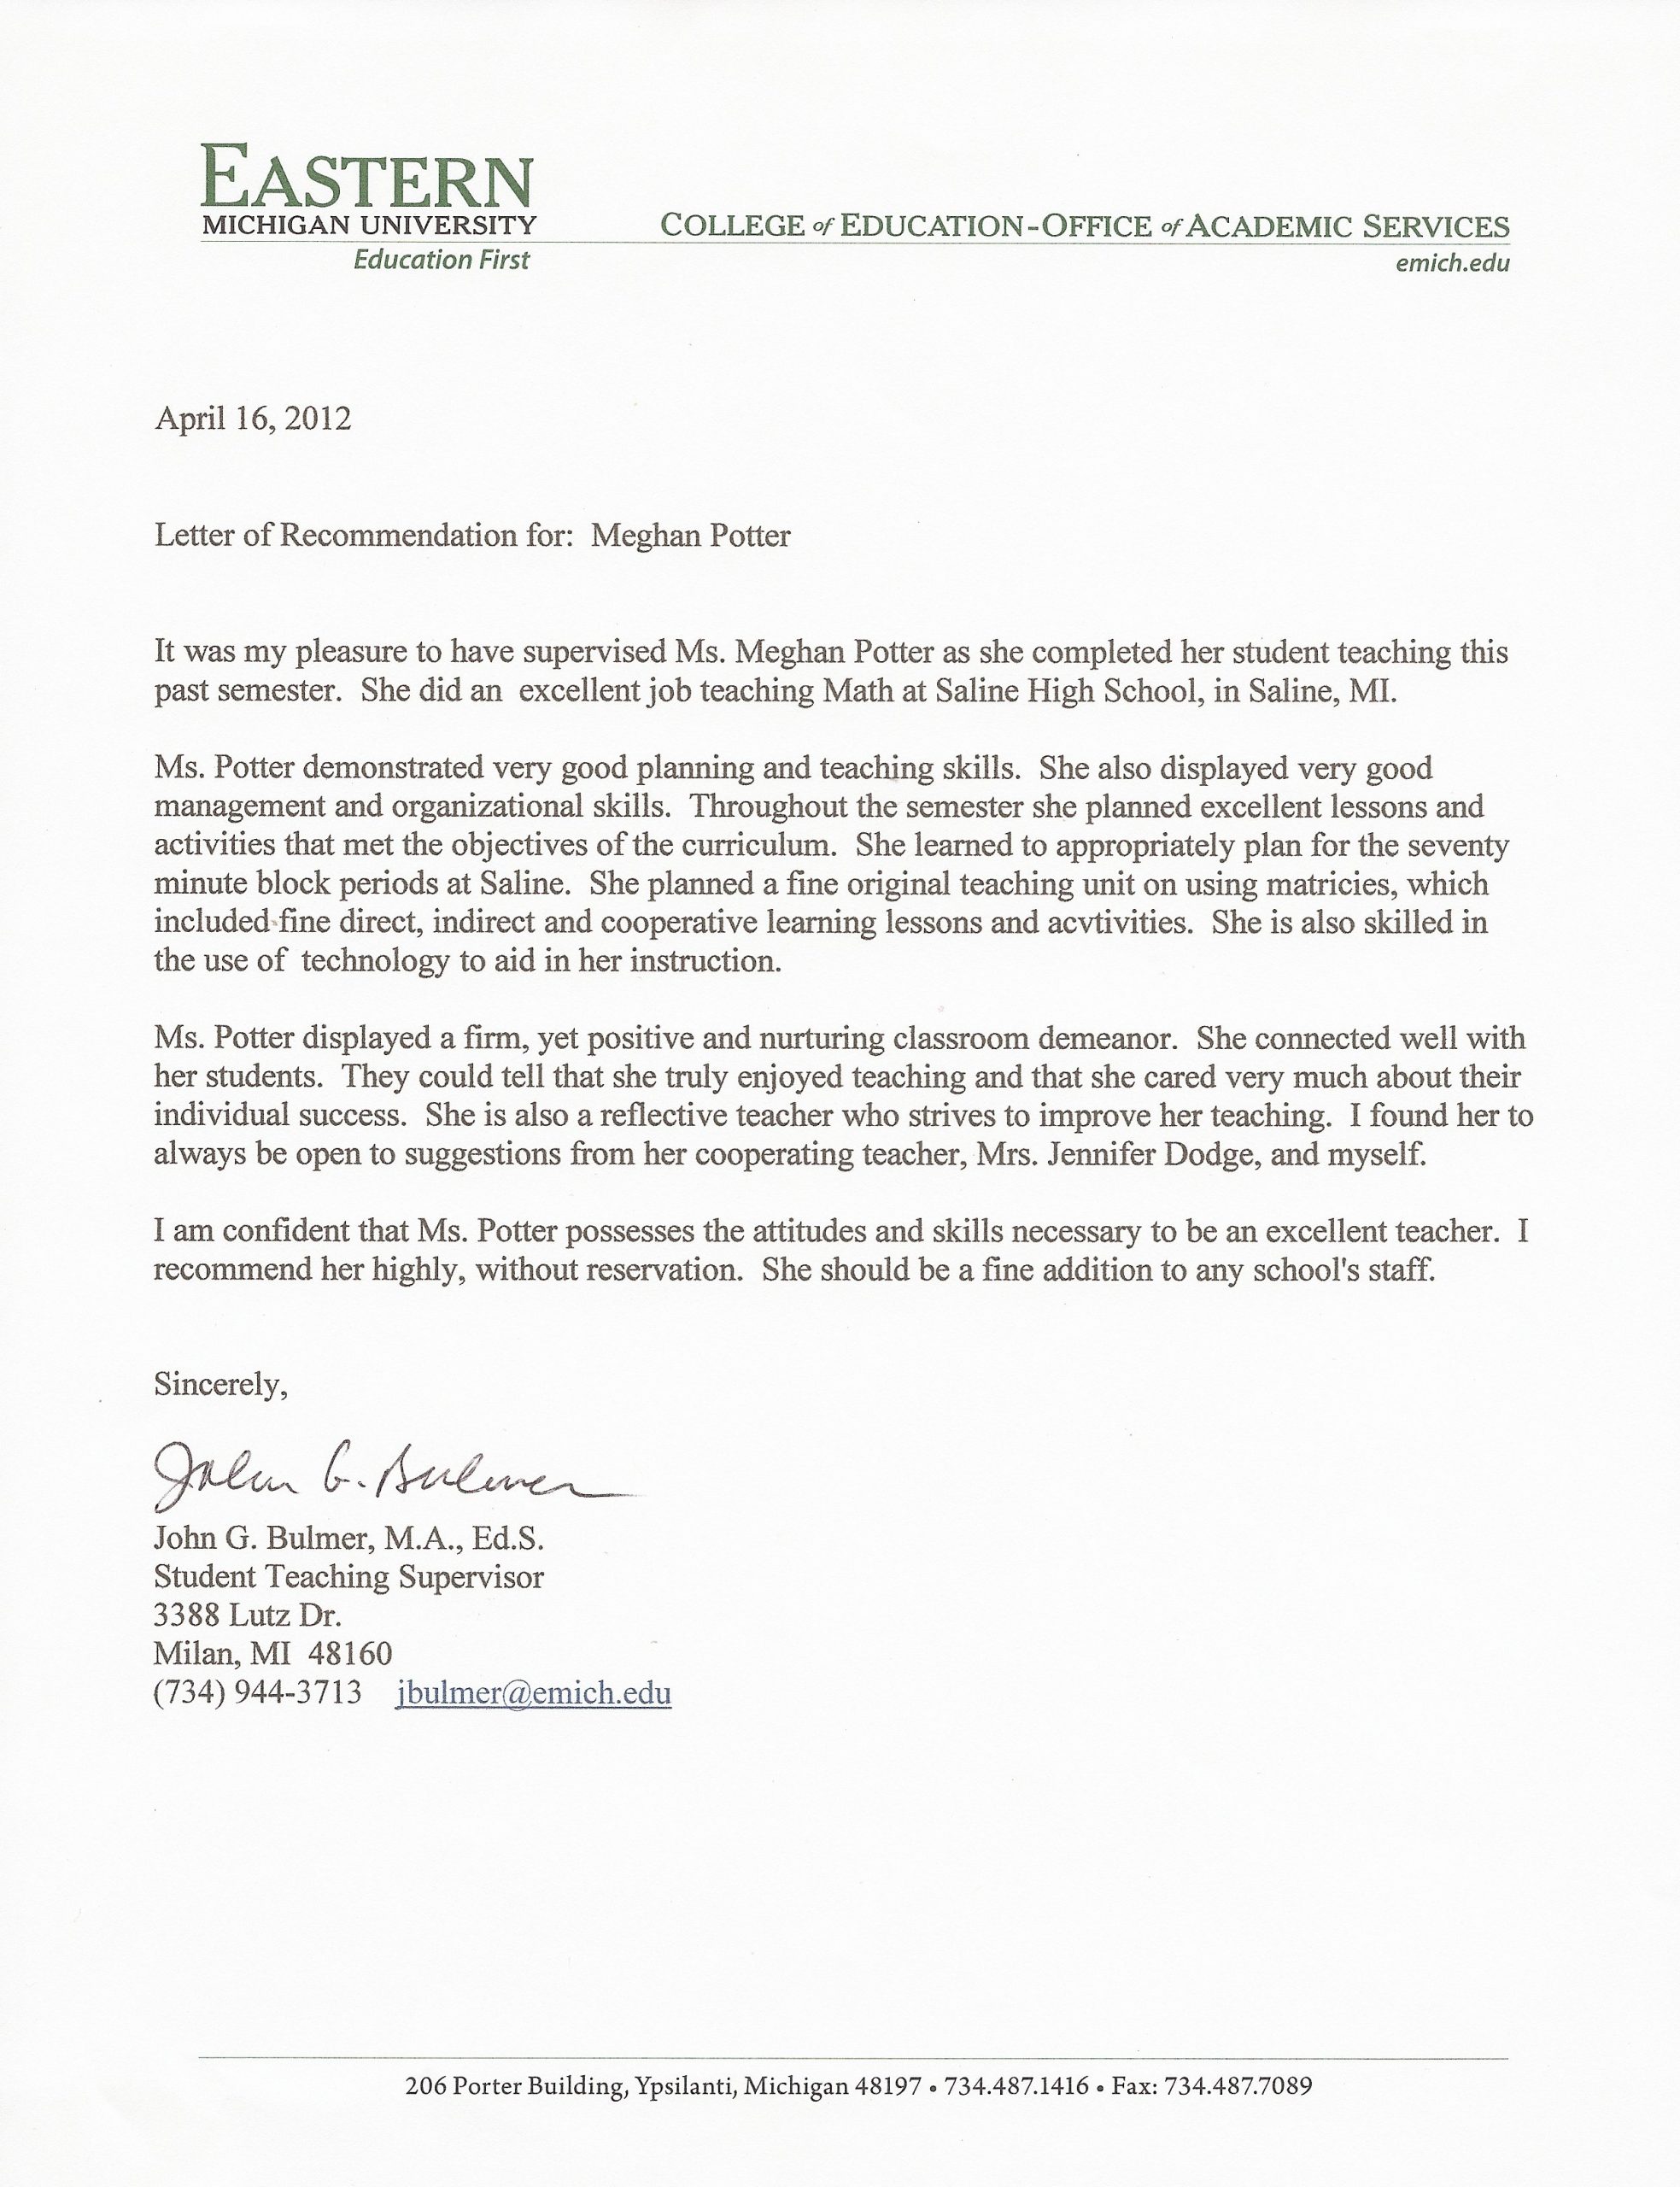 Sample Recommendation Letter For Middle School Student From within dimensions 2496 X 3248